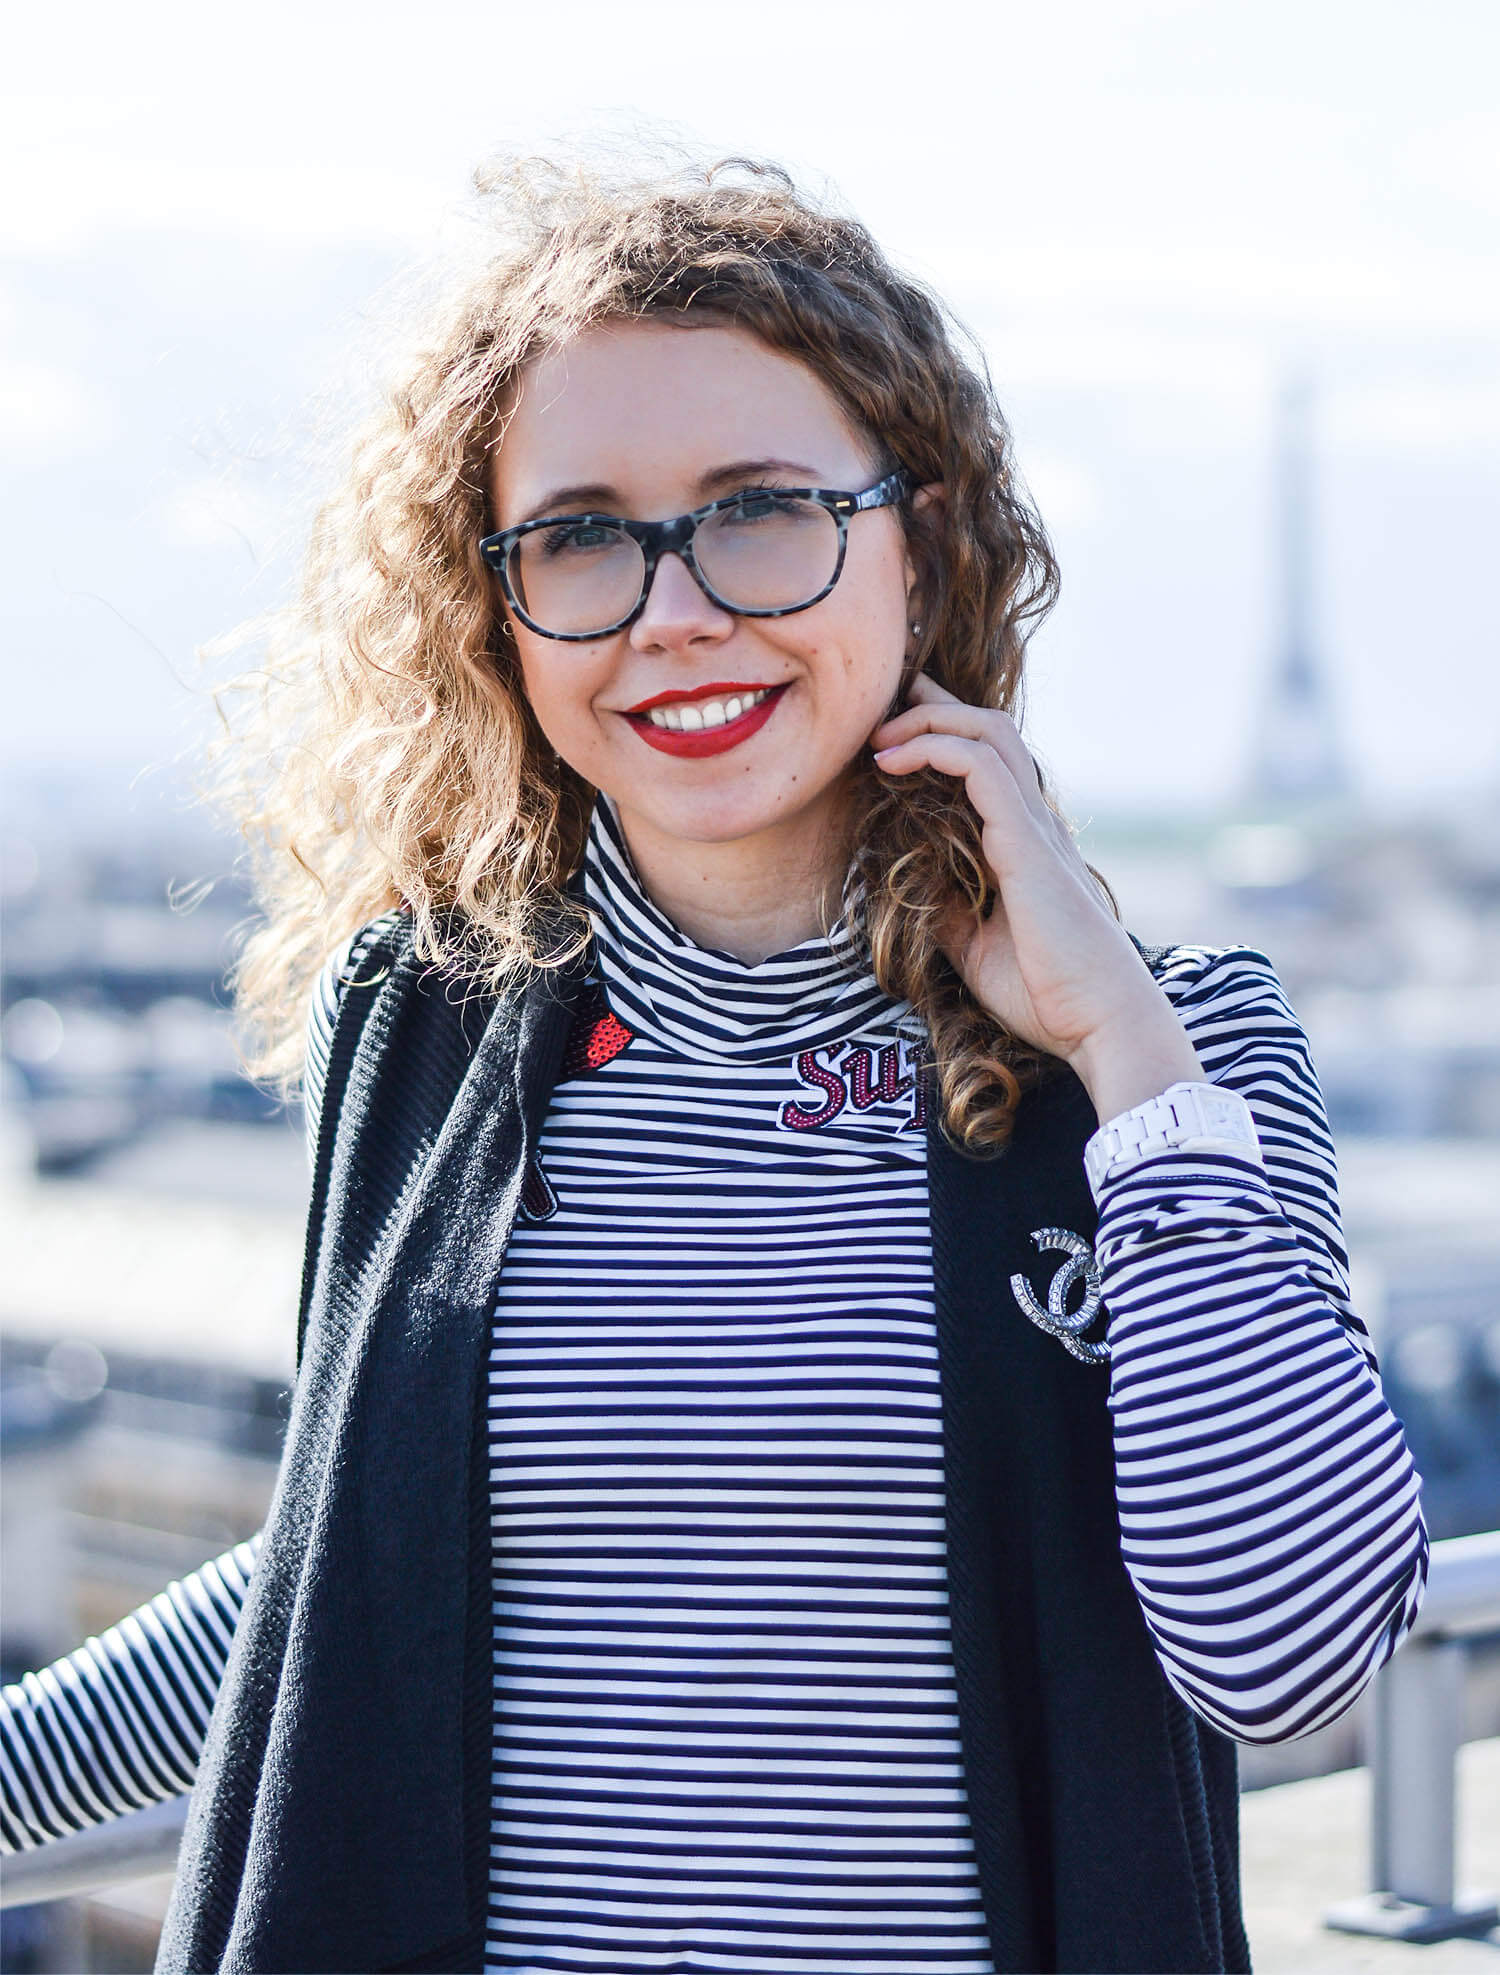 Kationette-fashionblog-paris-outfit-chanel-eiffeltower-nike-streetstyle-curls-patches